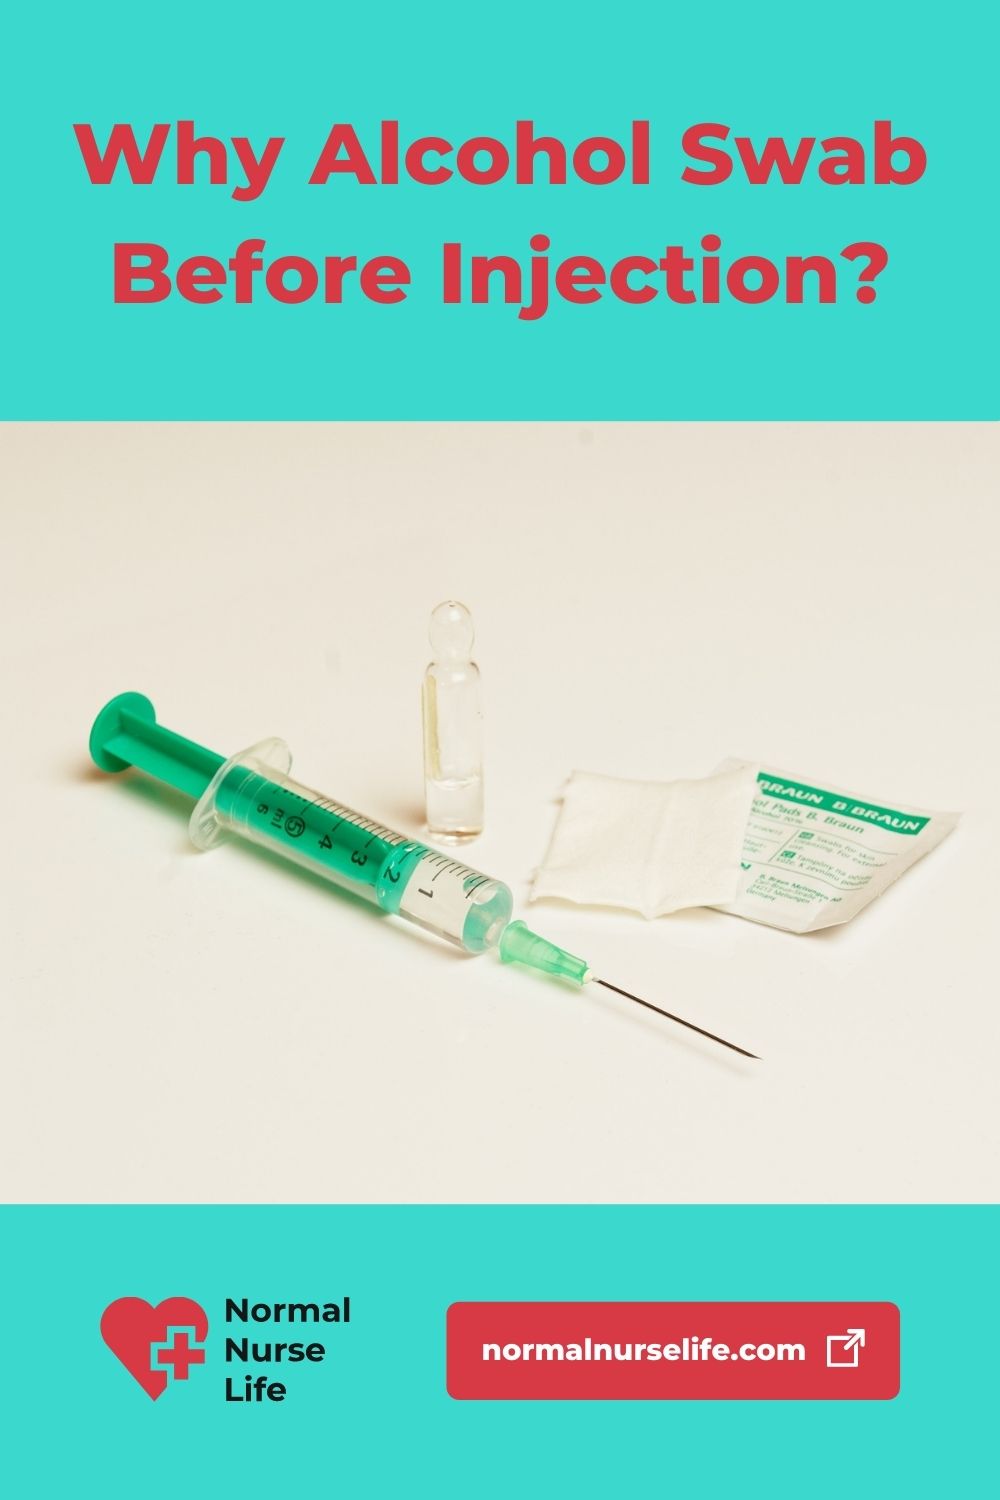 Why use alcohol swab before injection